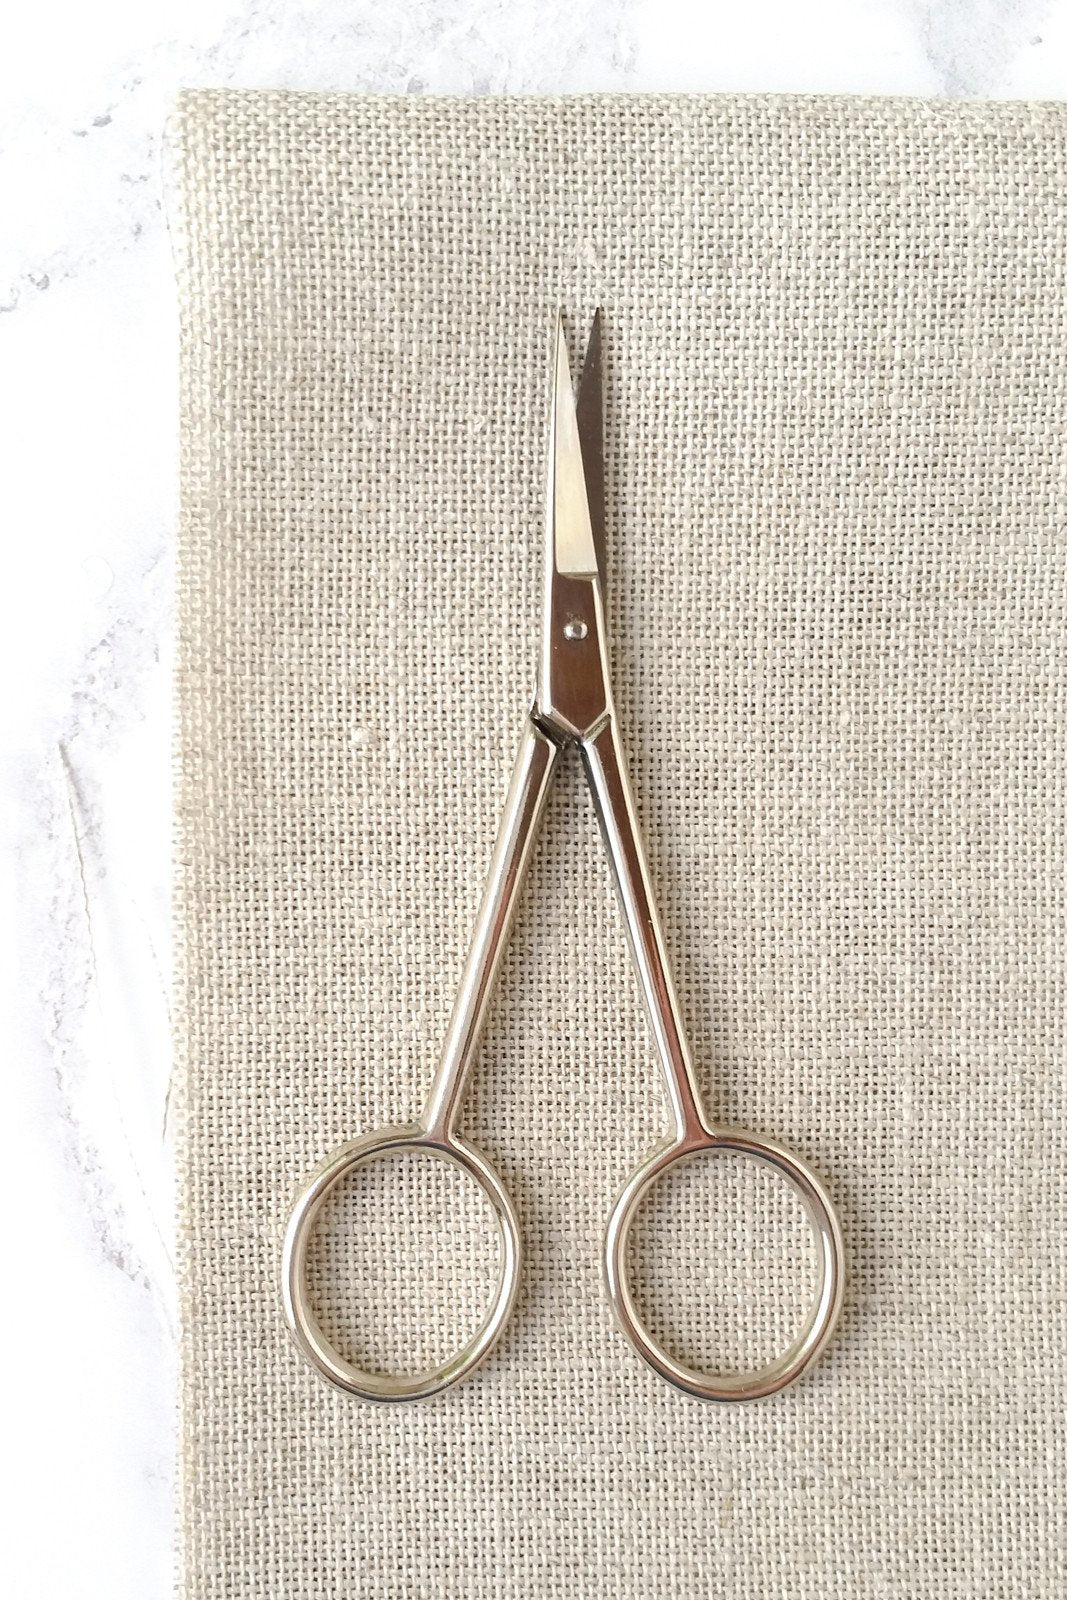 Classic long handled embroidery scissors